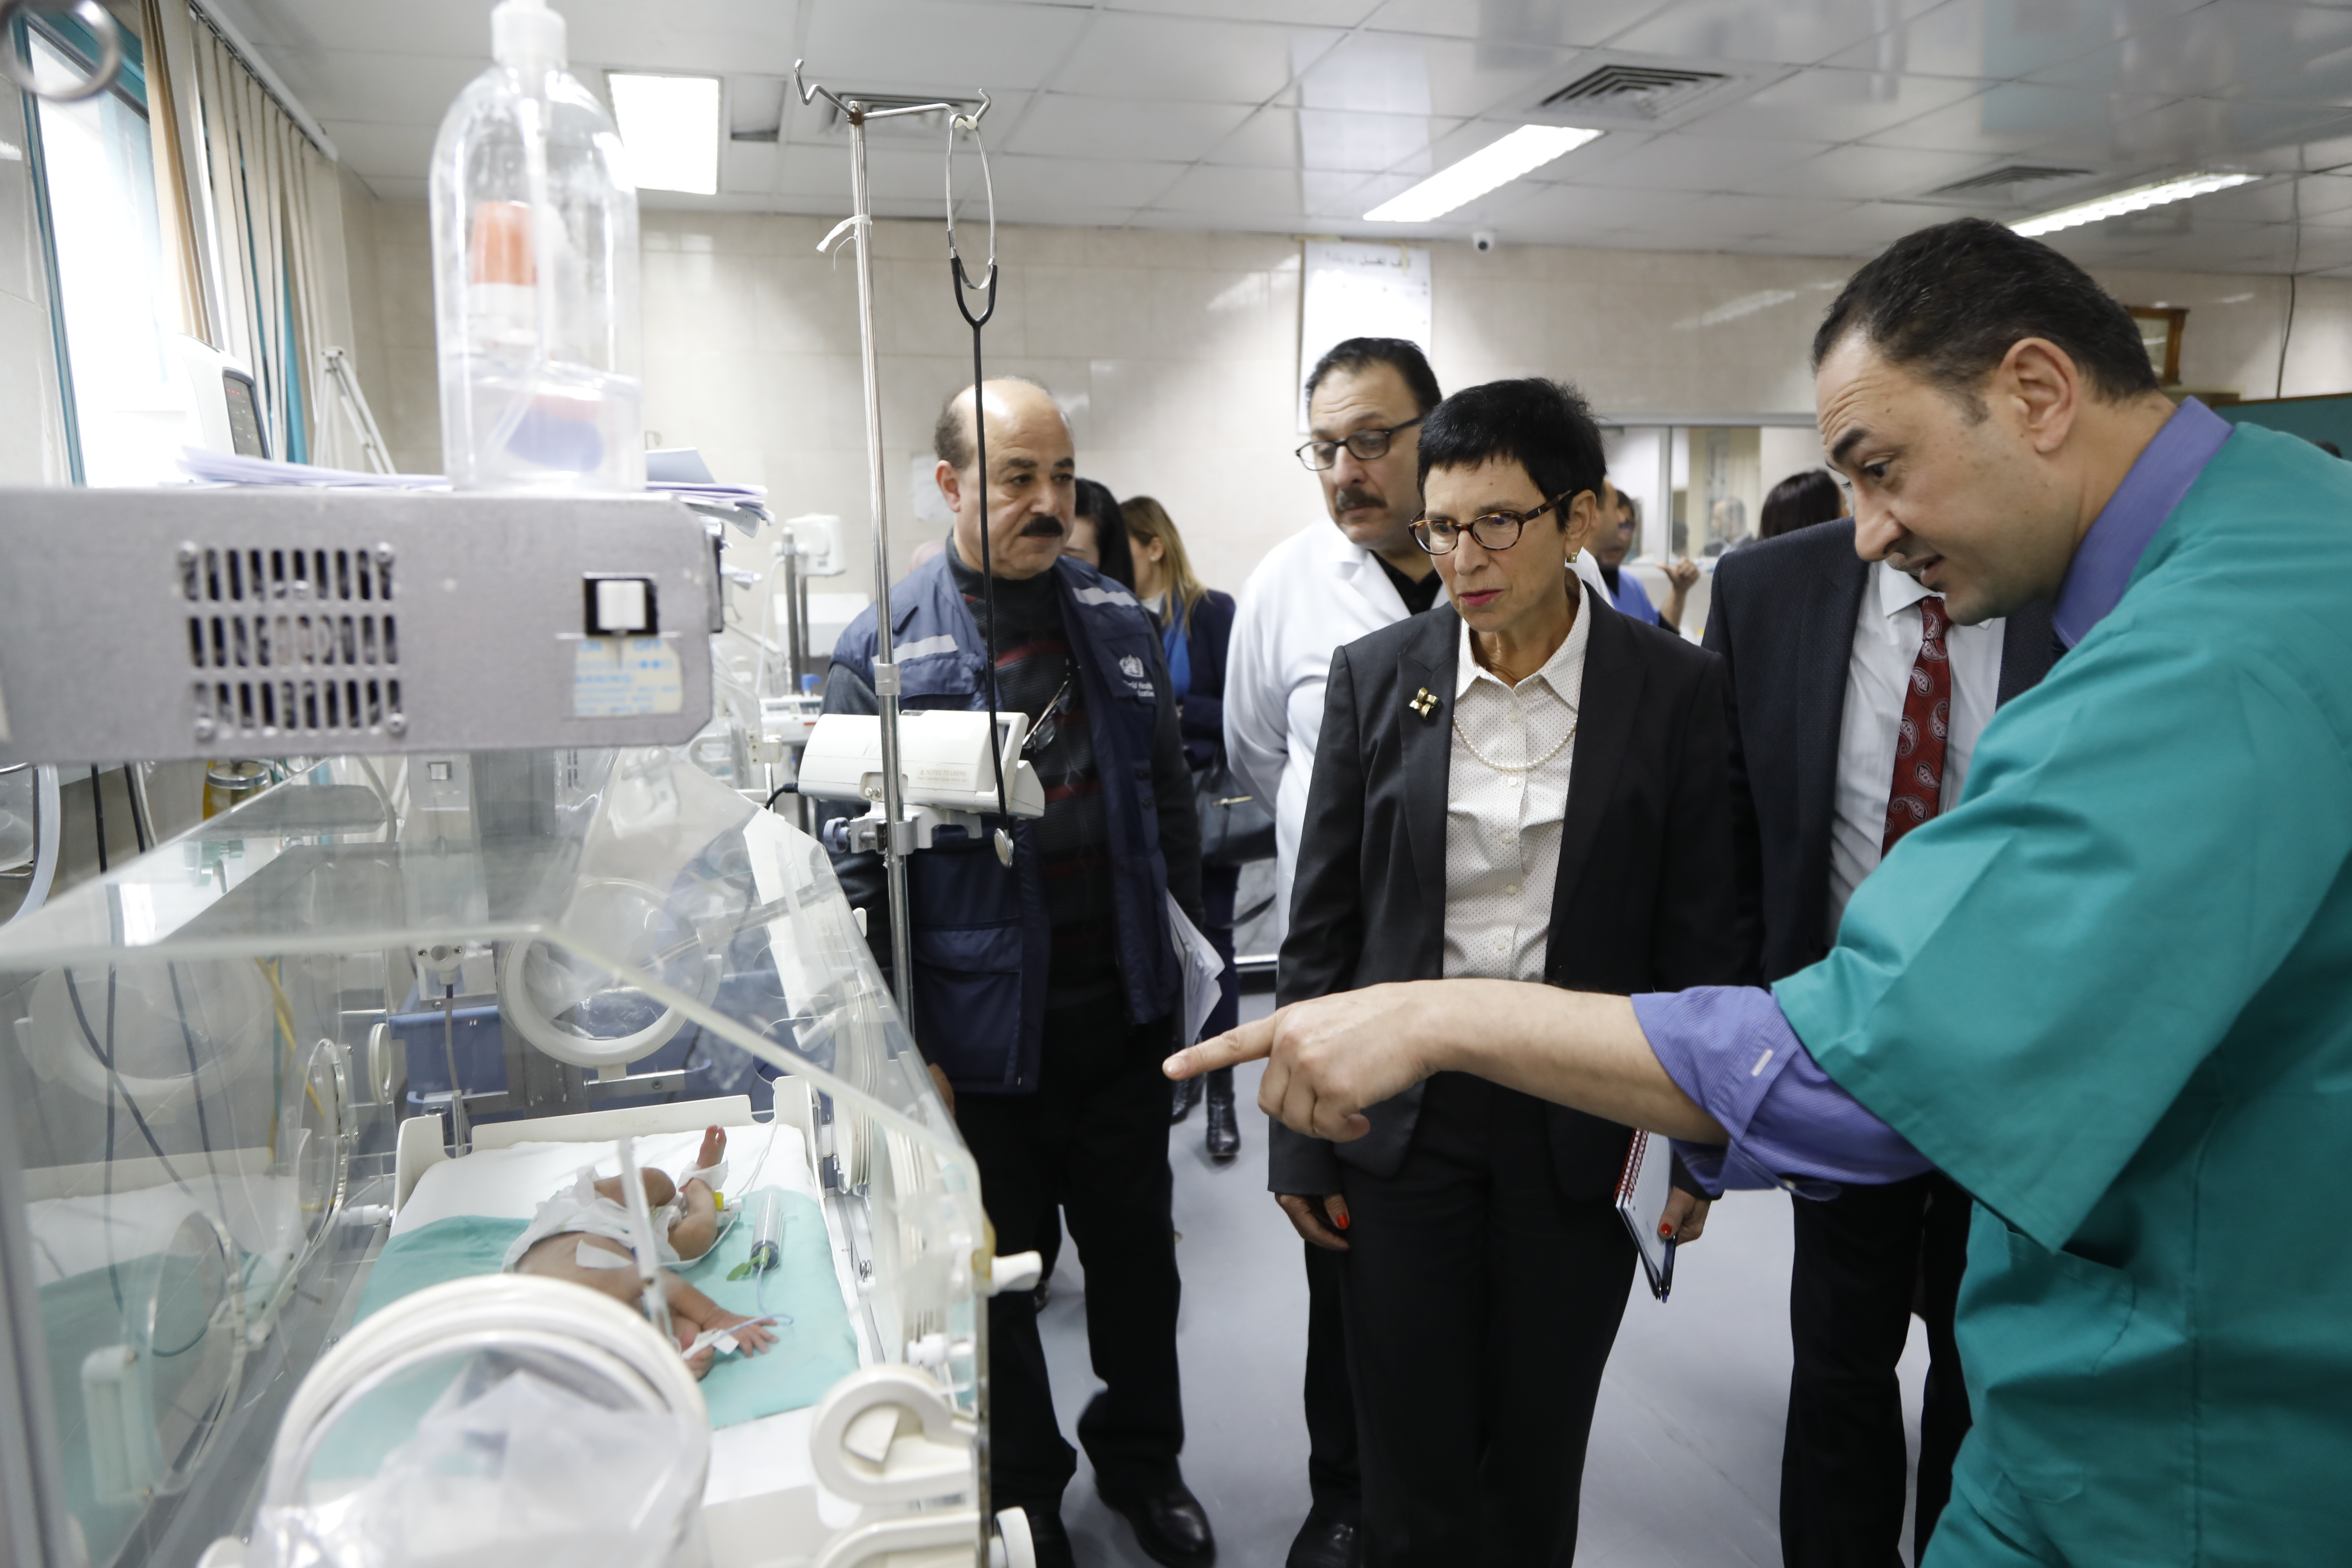 United Nations Assistant Secretary-General for Humanitarian Affairs and Deputy Emergency Relief Coordinator, Ursula Mueller, visiting Gaza's main hospital, Ash Shifaa, on 15 January 2020. Photo by UNRWA